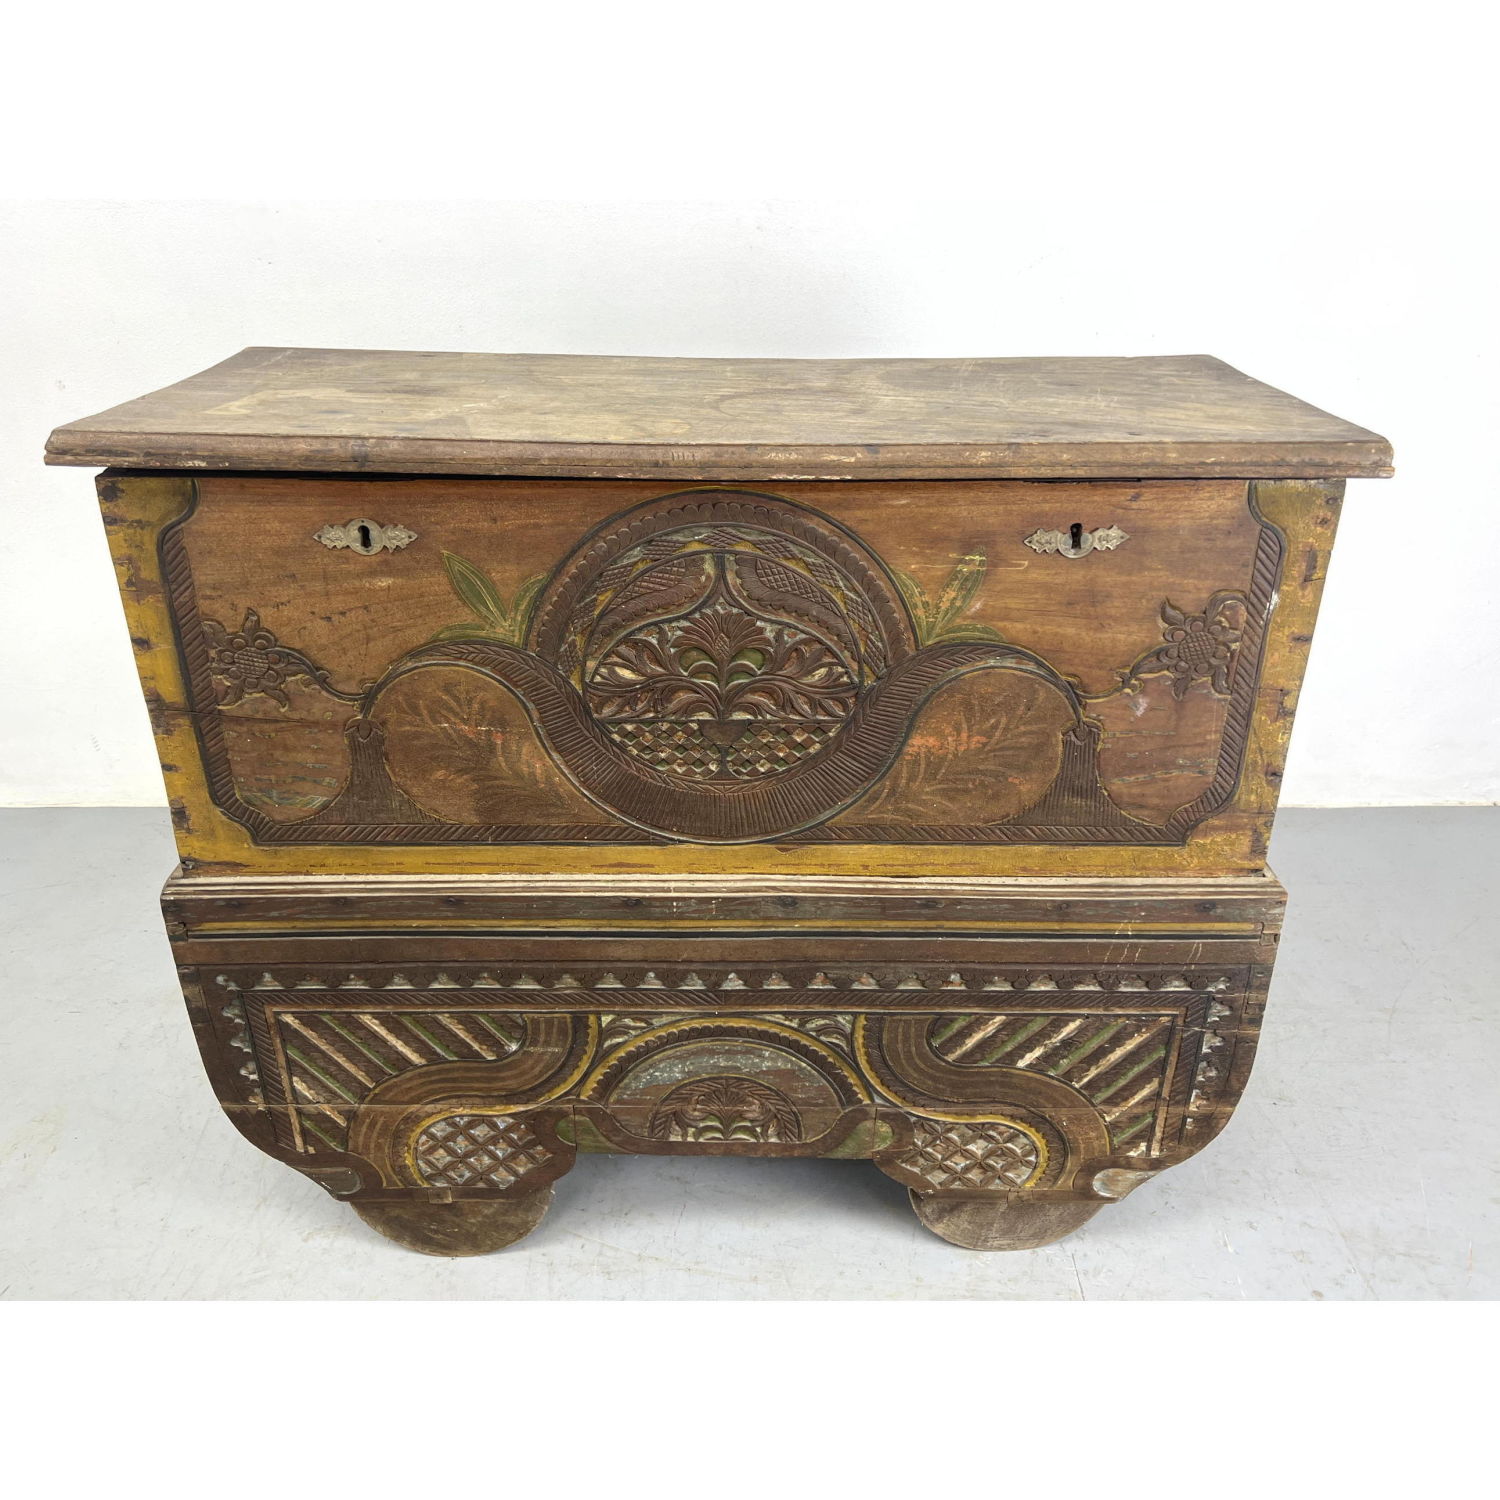 Antique Continental Carved Trunk 2ff8e8